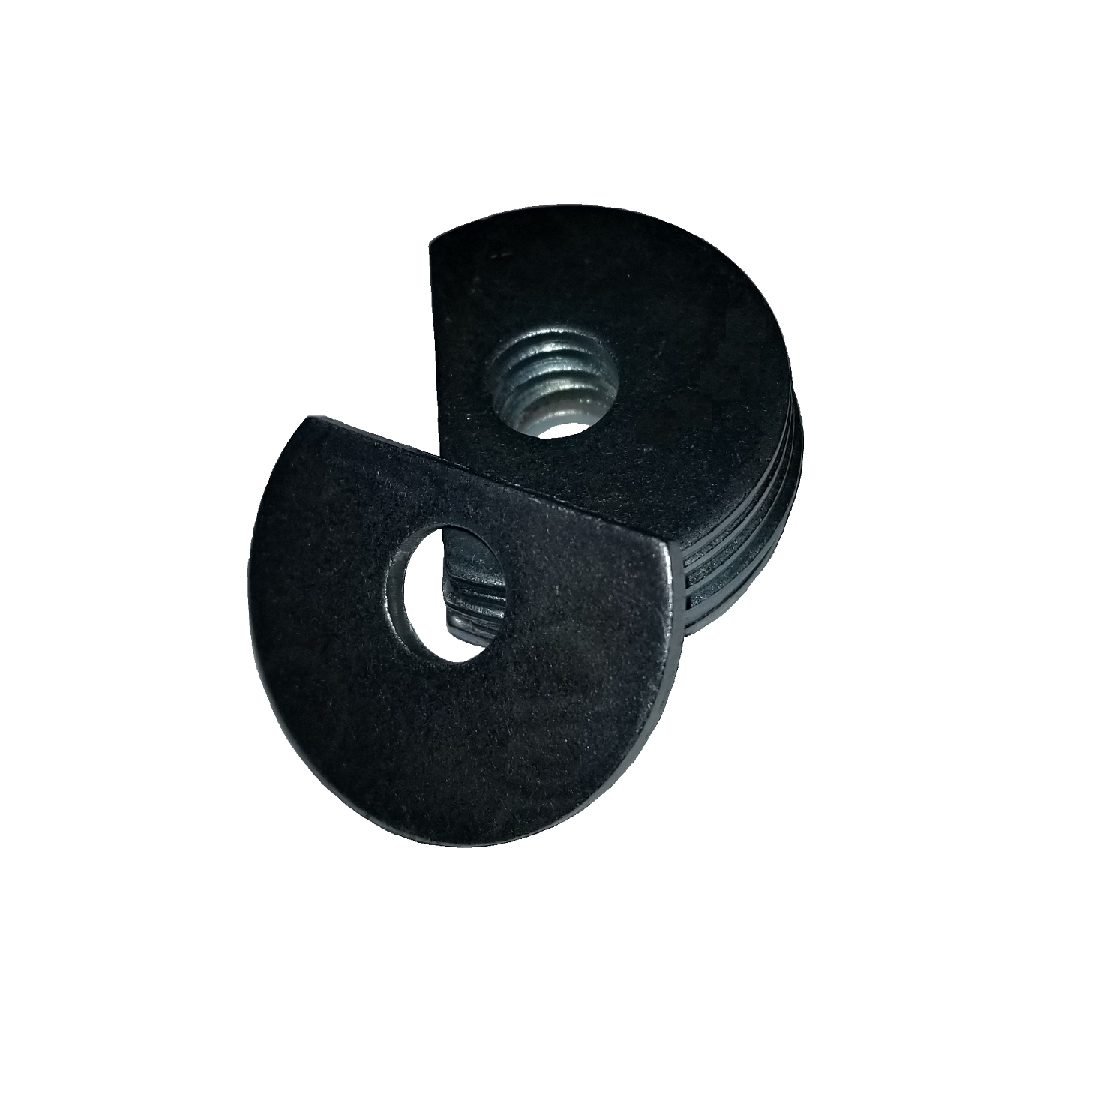 Clipped OD Washer - 0.812 ID, 1.468 OD, 0.134 Thick, Low Carbon Steel - Soft, Galvanized